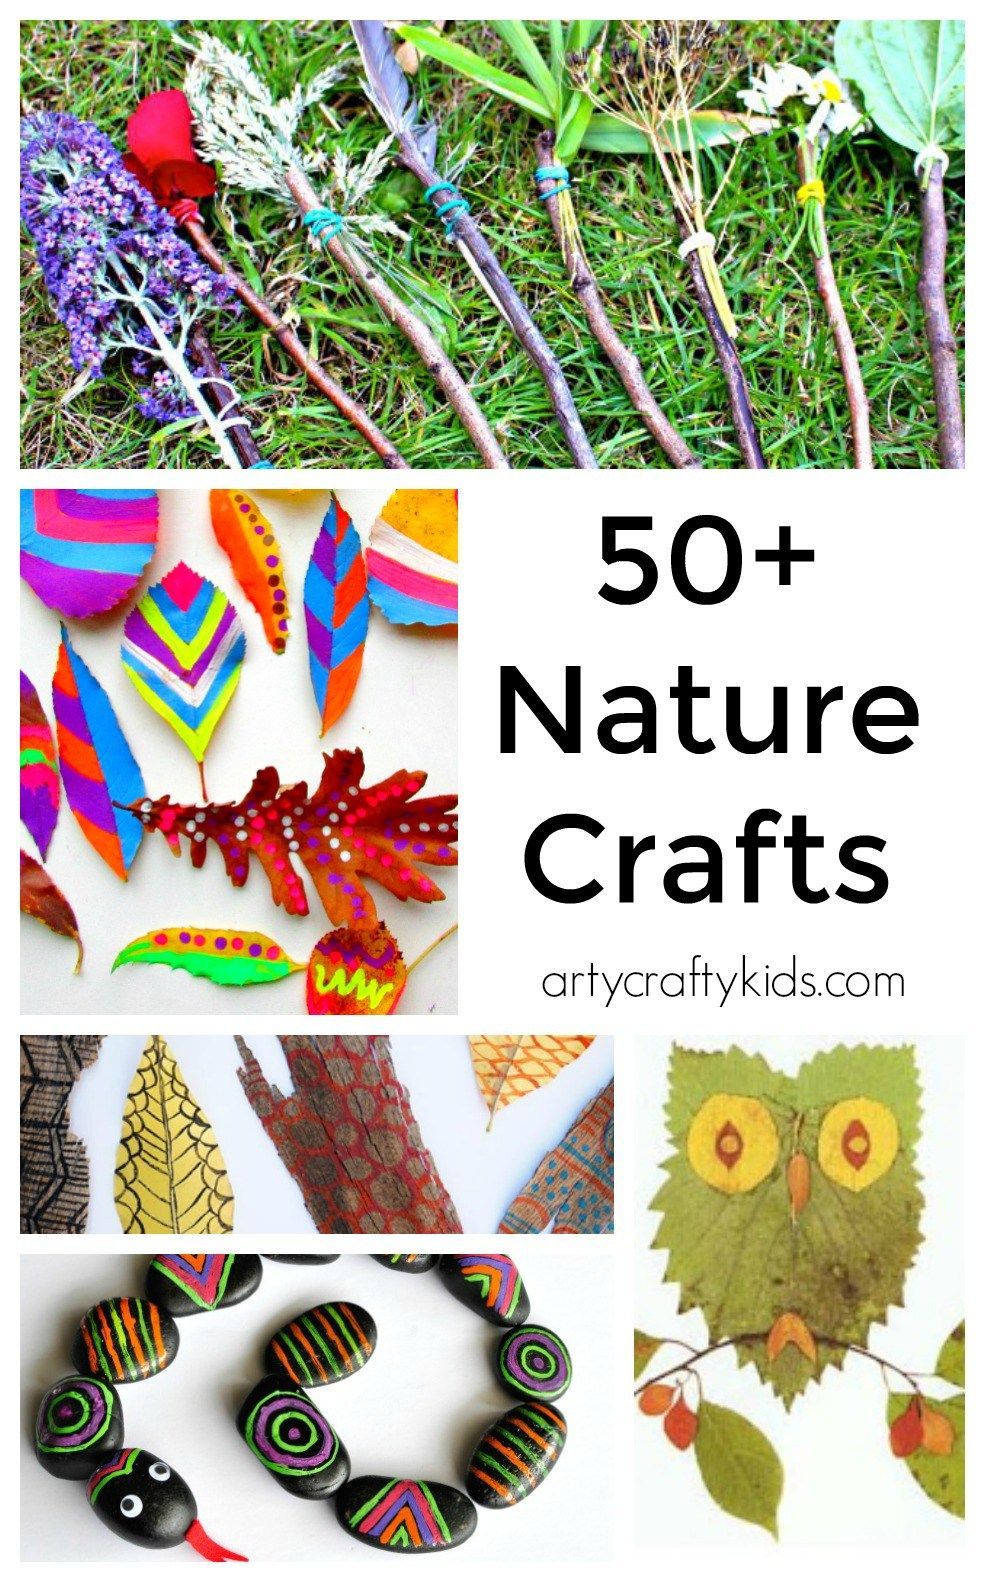 50 Nature Crafts for Kids -   22 nature crafts
 ideas